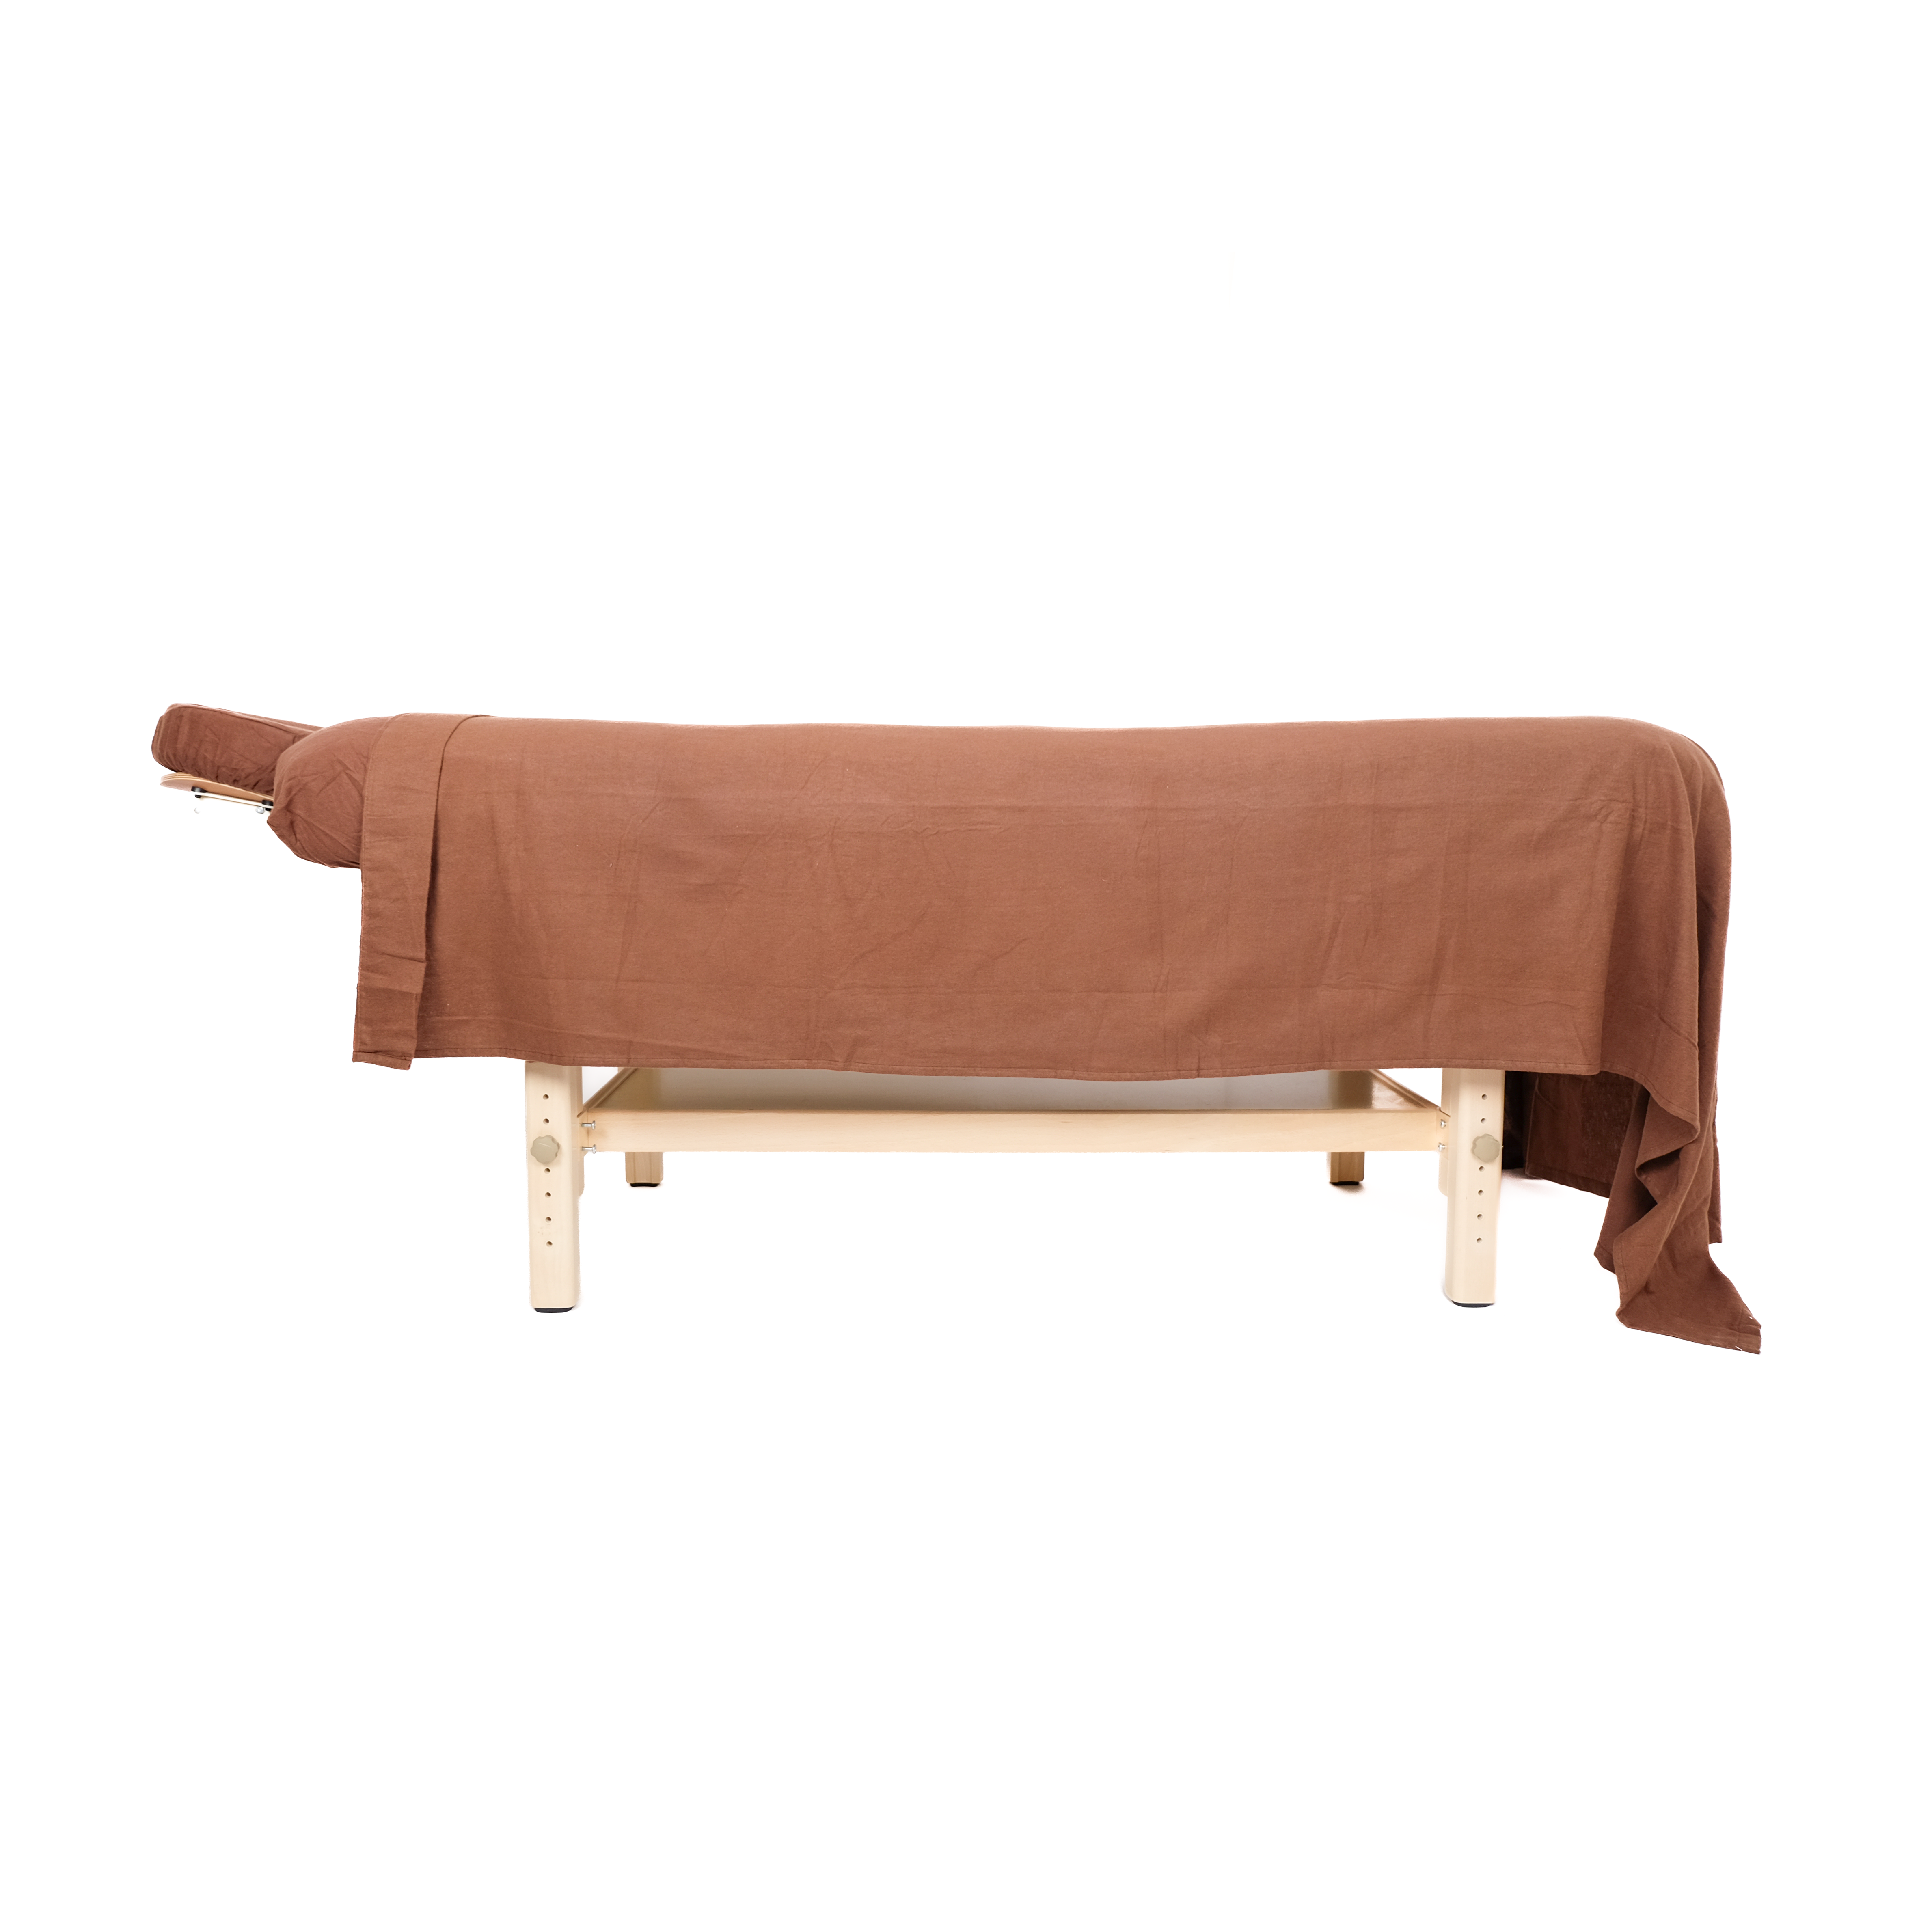 Cotton Massage Table Sheet Sets Flat, Fitted, and face rest cover Chocolate